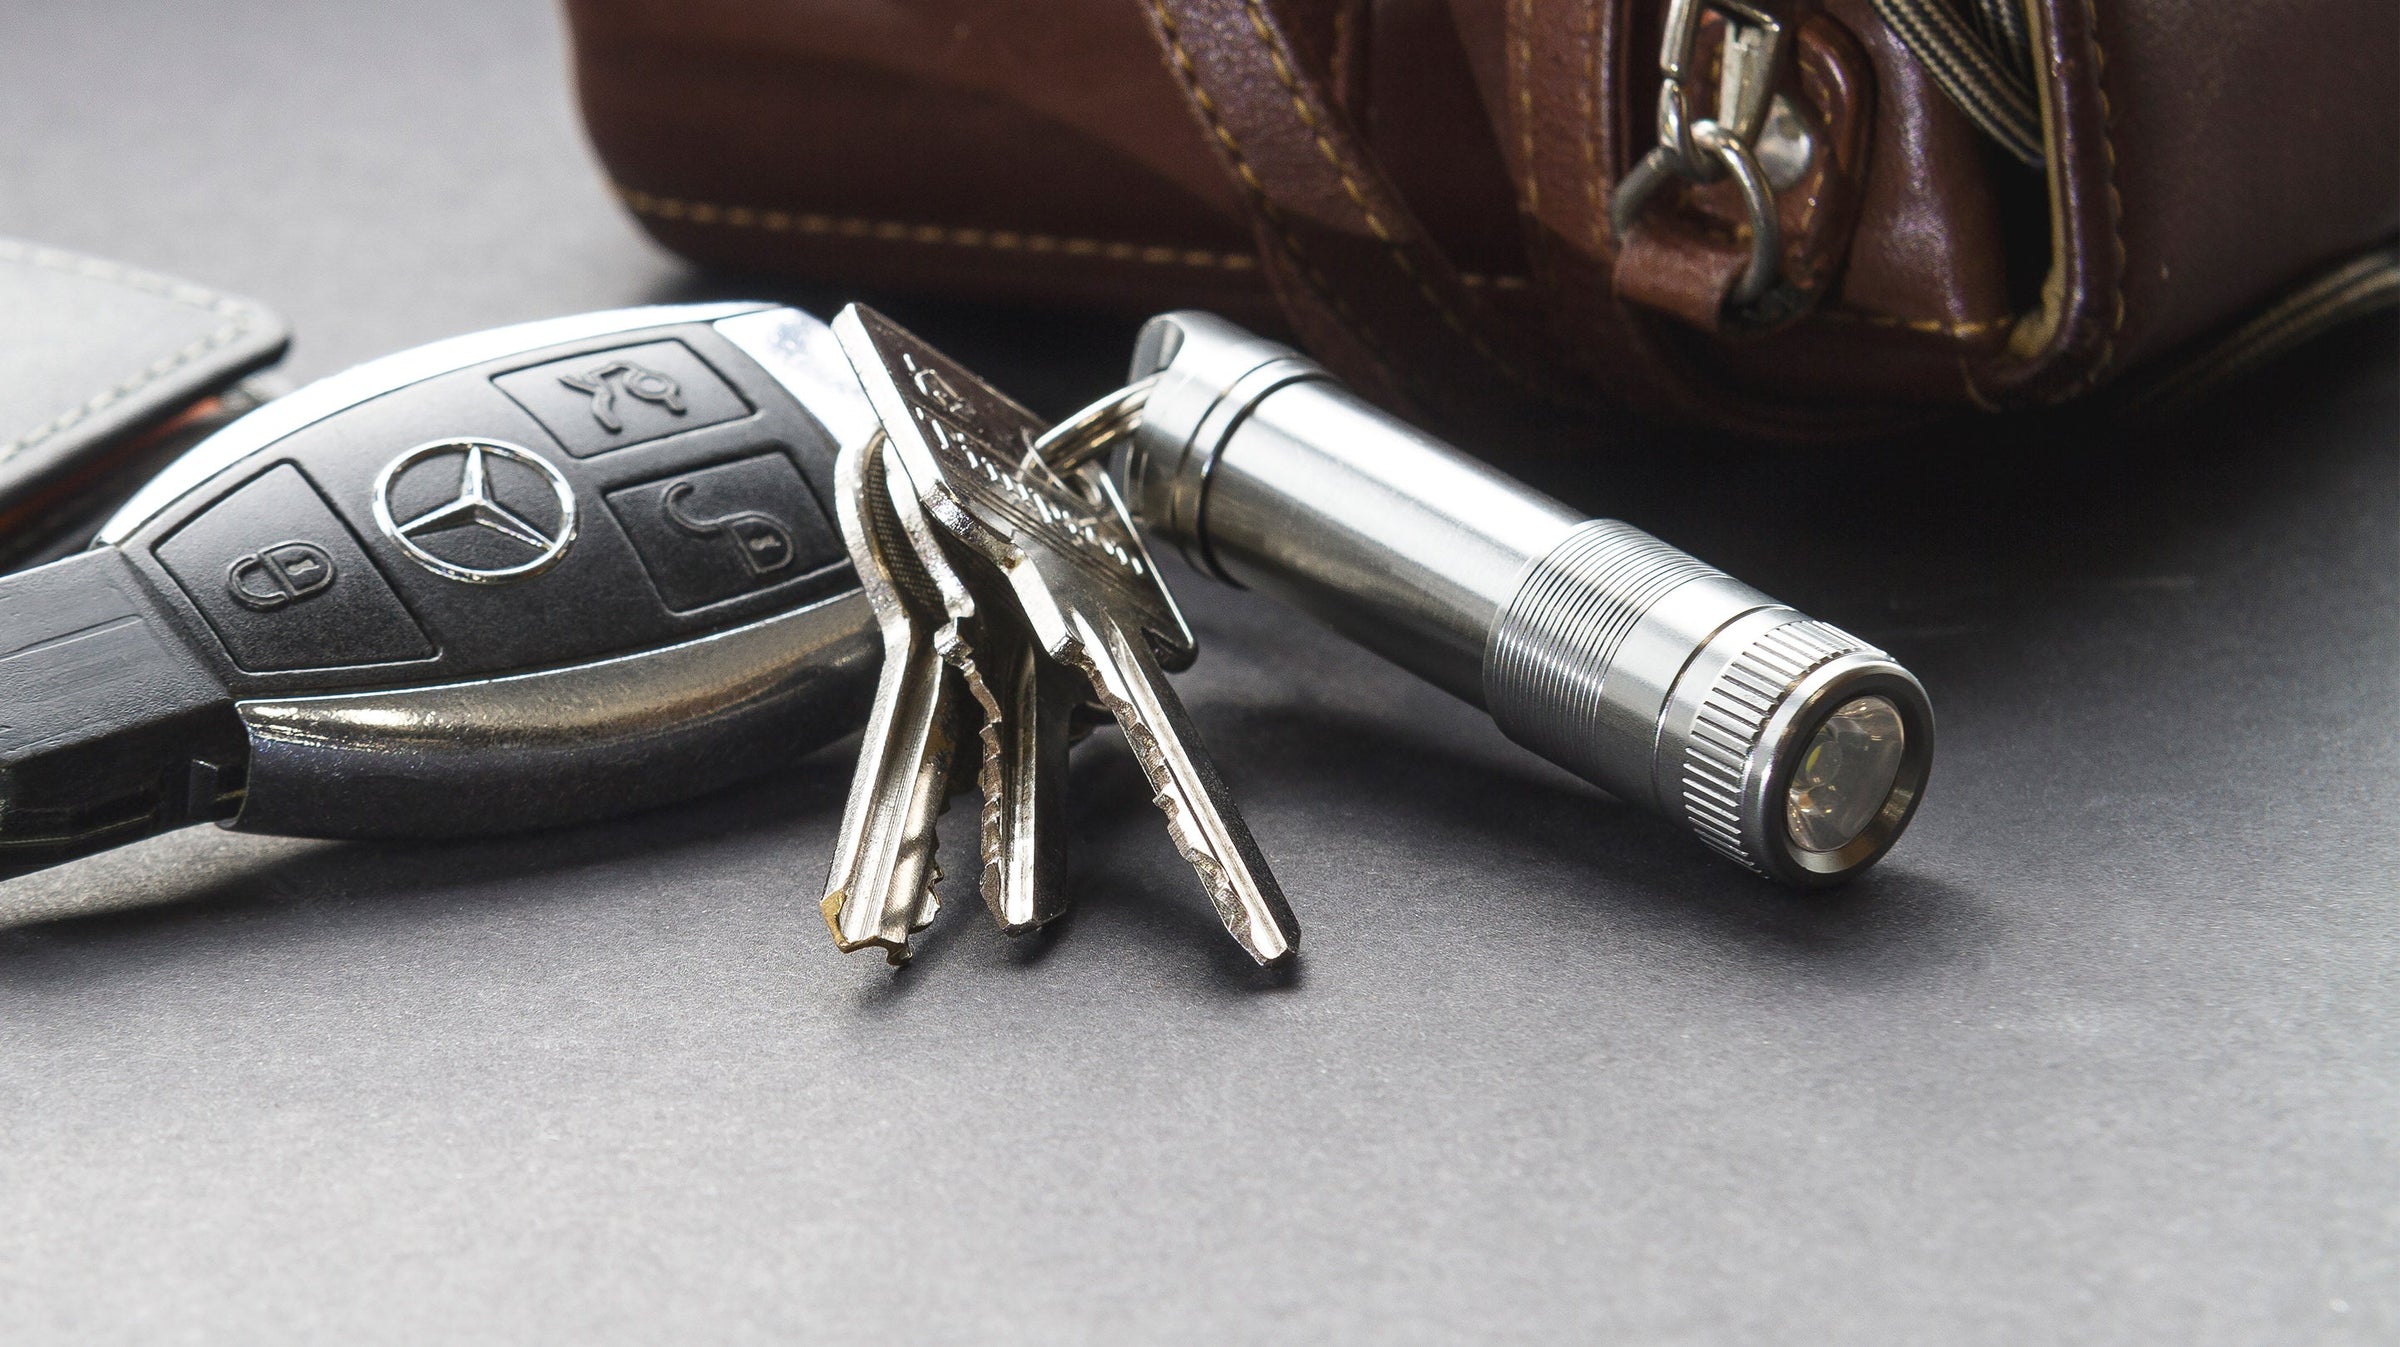 True Utility key chain lights are practical useful and easy to carry. 